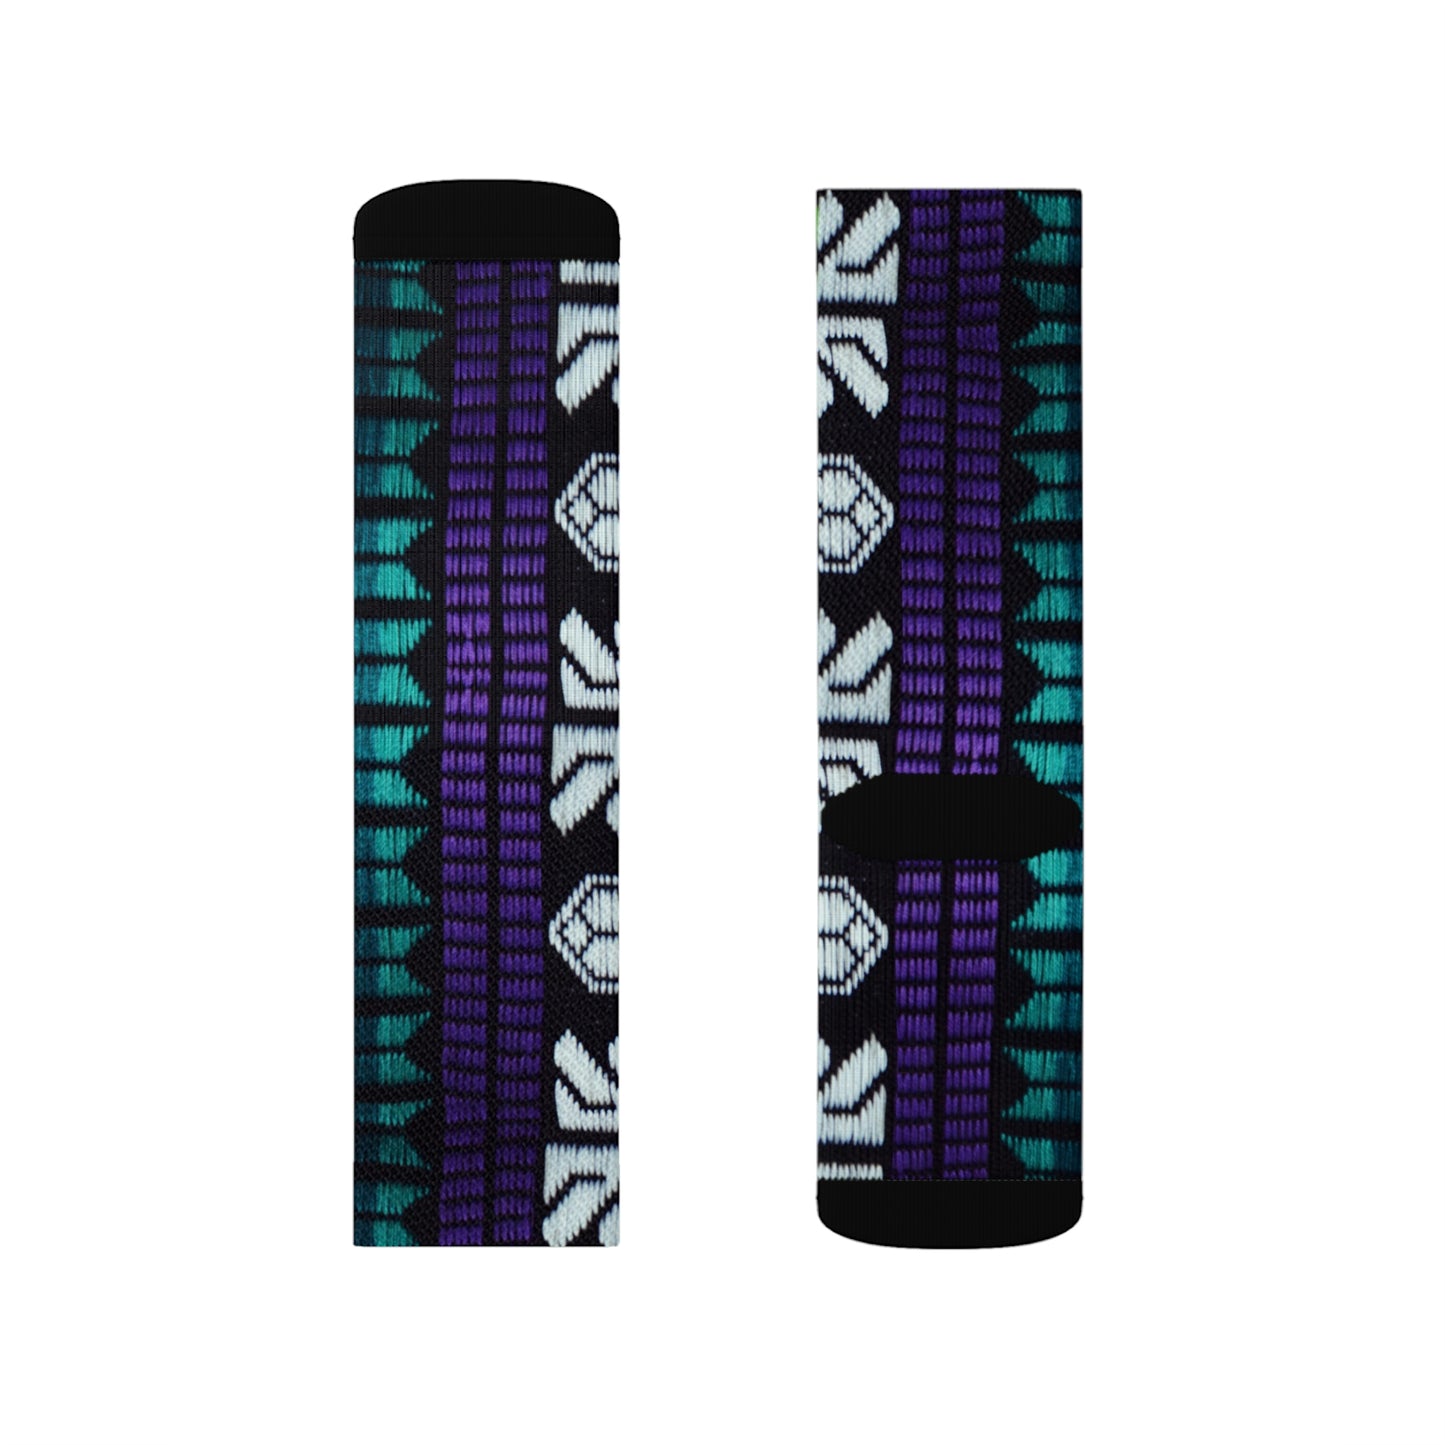 A Pack of Lies! Sublimation Socks